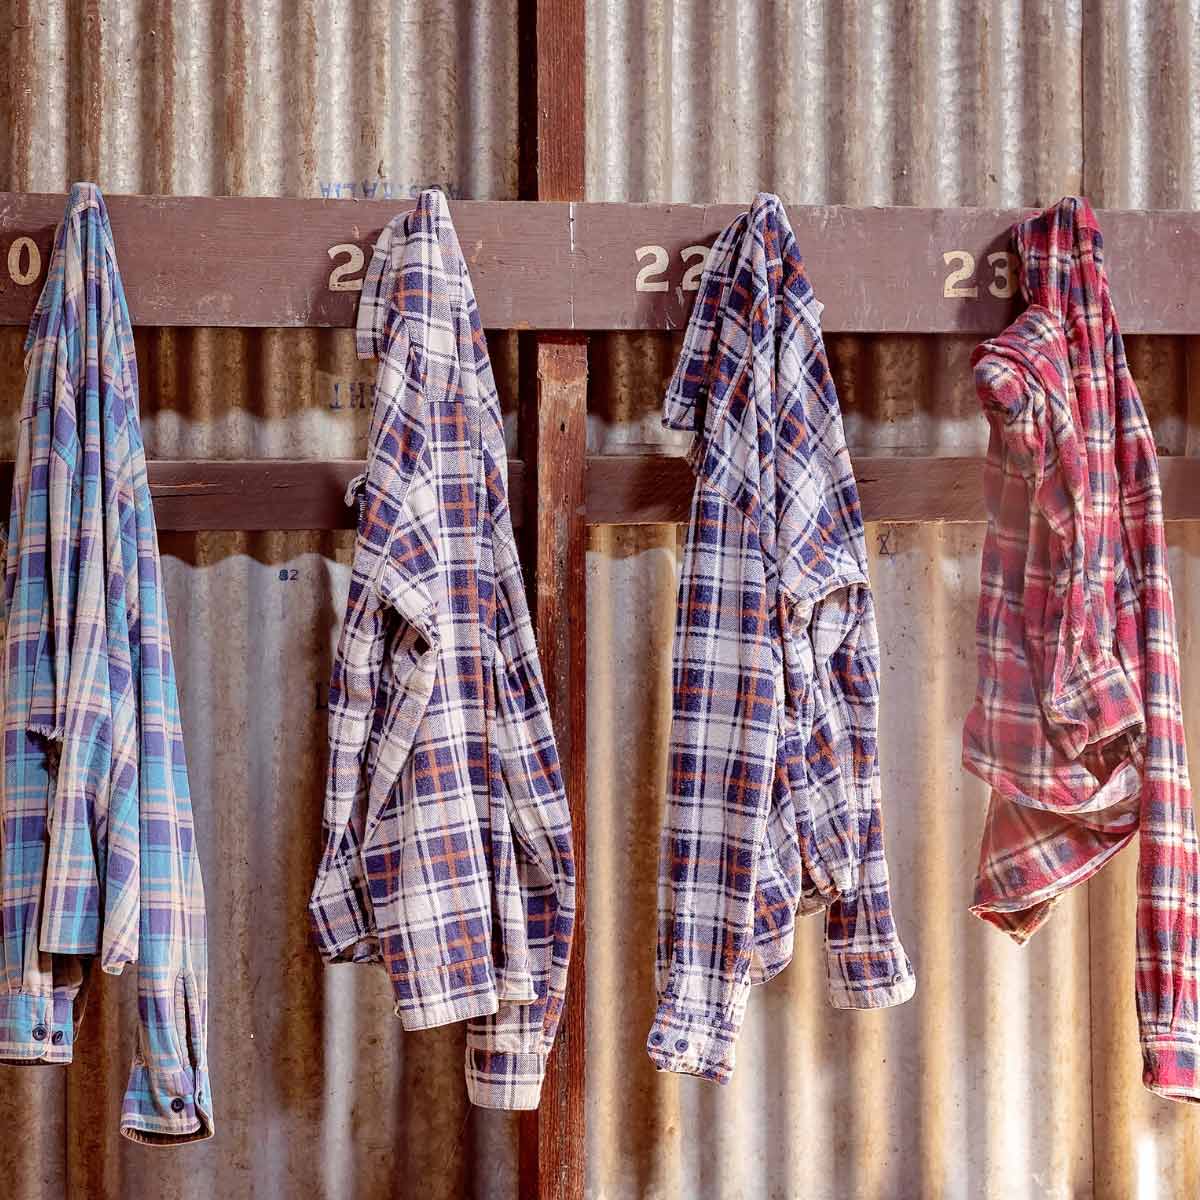 Multiple Colors of flannel